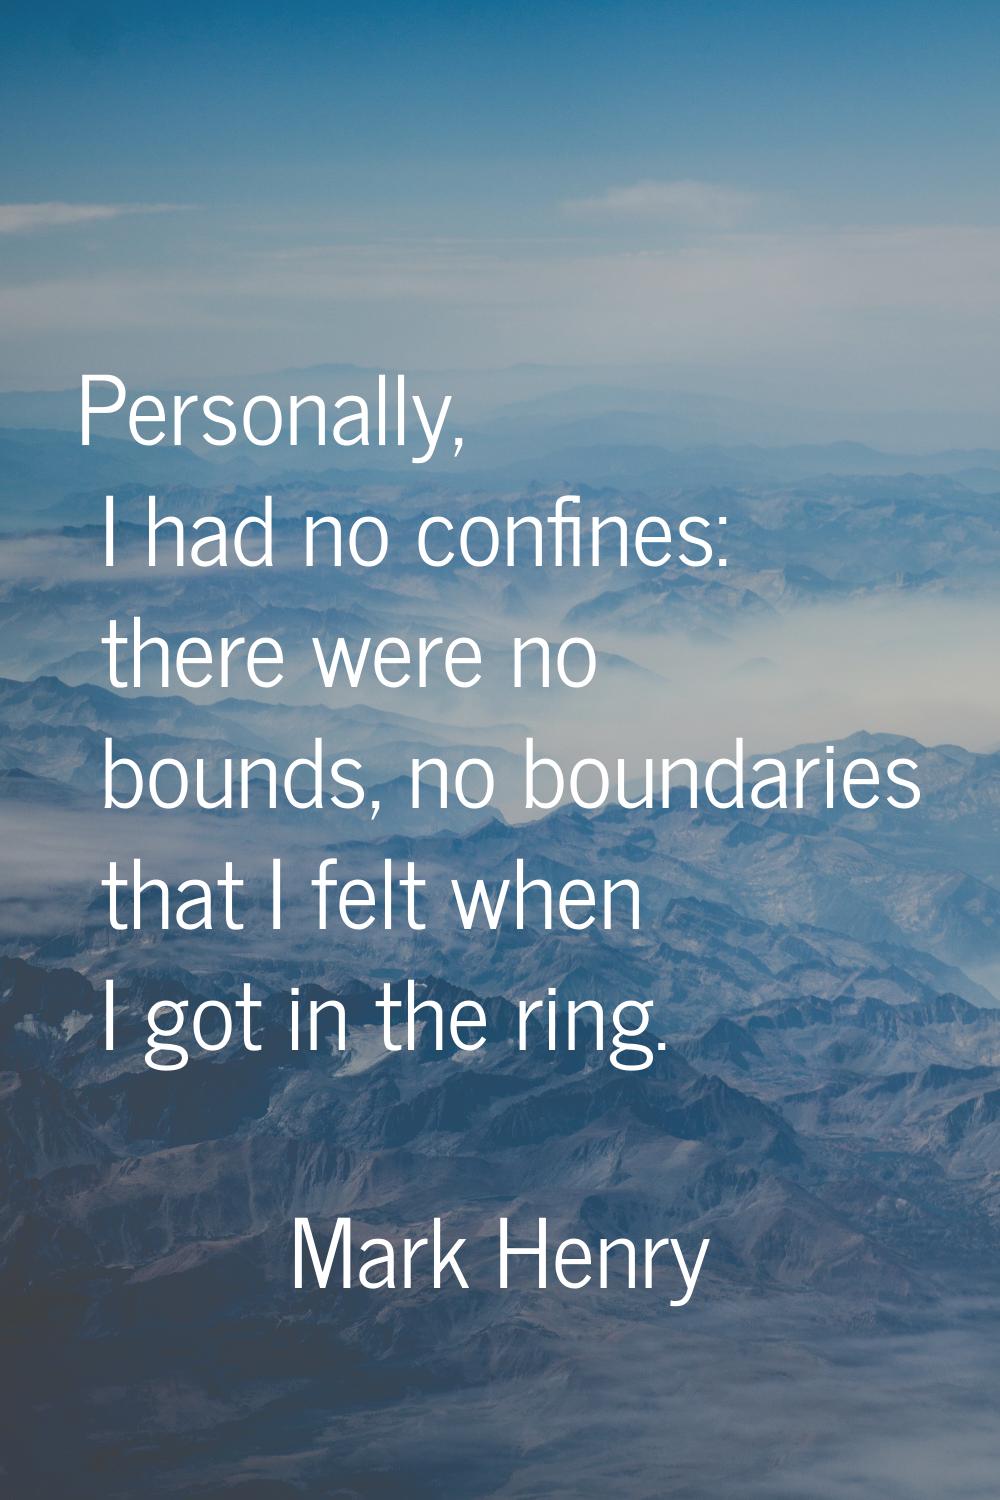 Personally, I had no confines: there were no bounds, no boundaries that I felt when I got in the ri